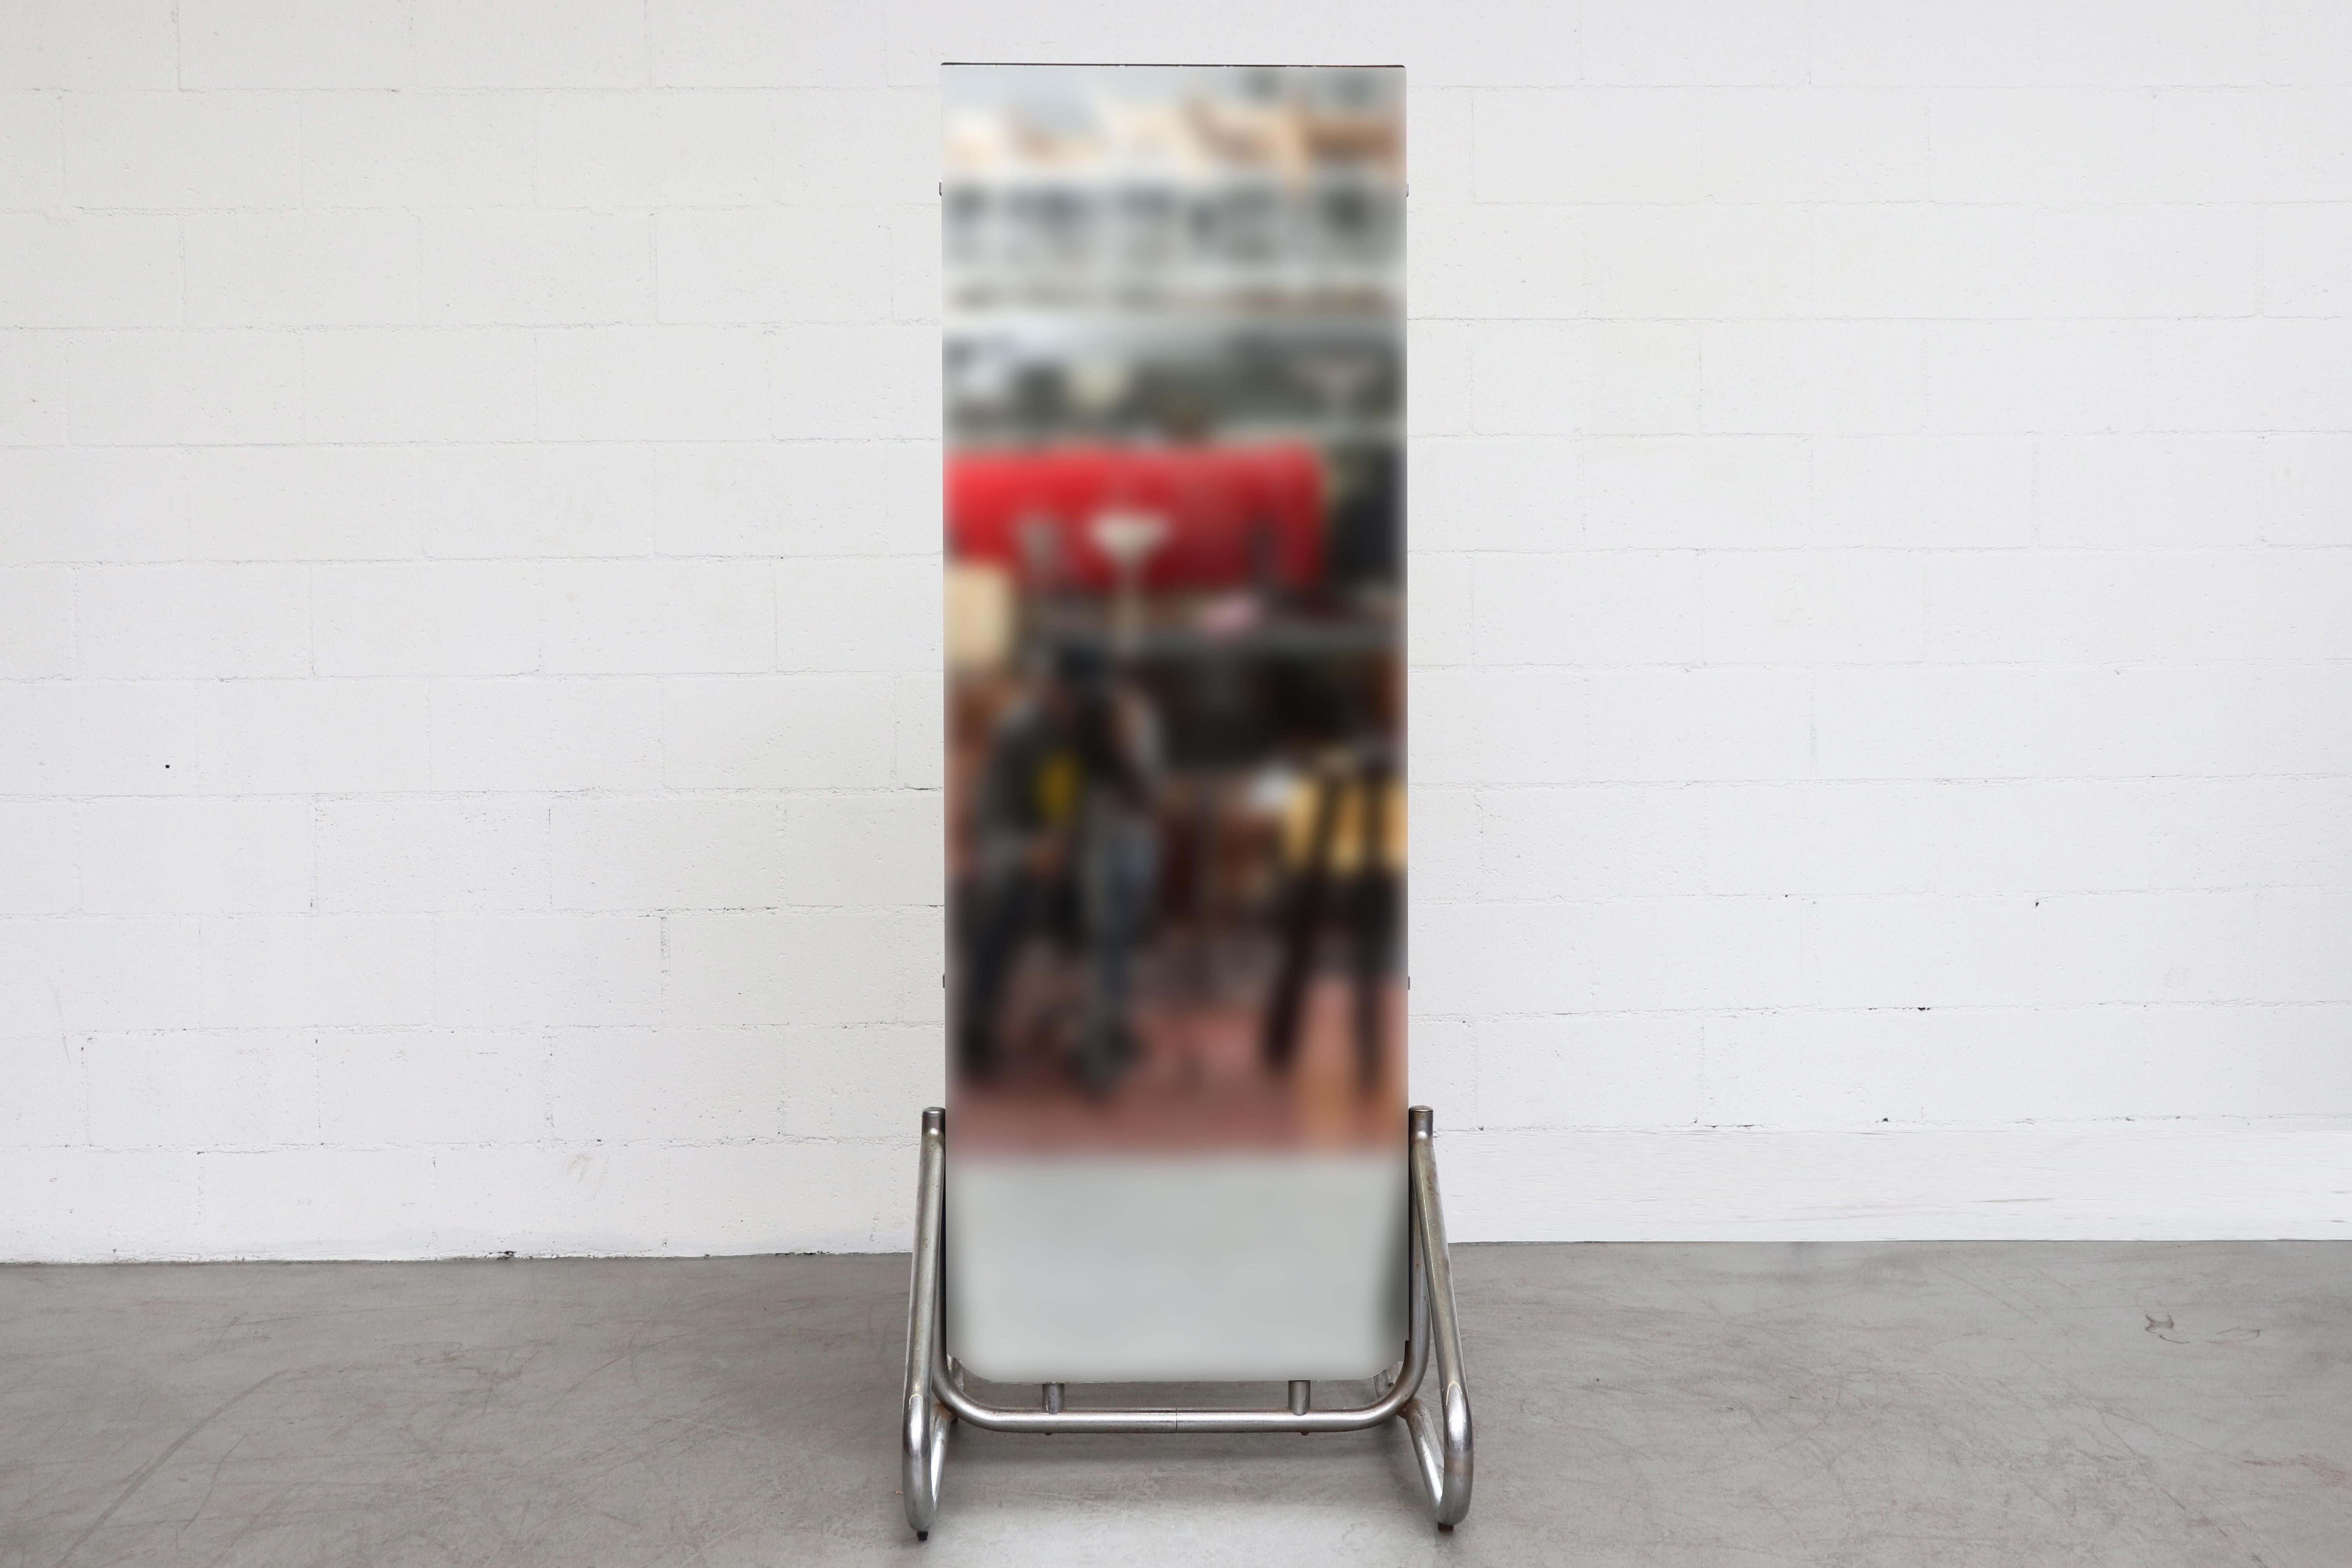 Chic Bauhaus chrome standing mirror. Black painted wood backing. In very original condition with visible signs of wear including patina to chrome base. Visible scratching to the frame and chipping to the mirror. Wear is consistent with its age and